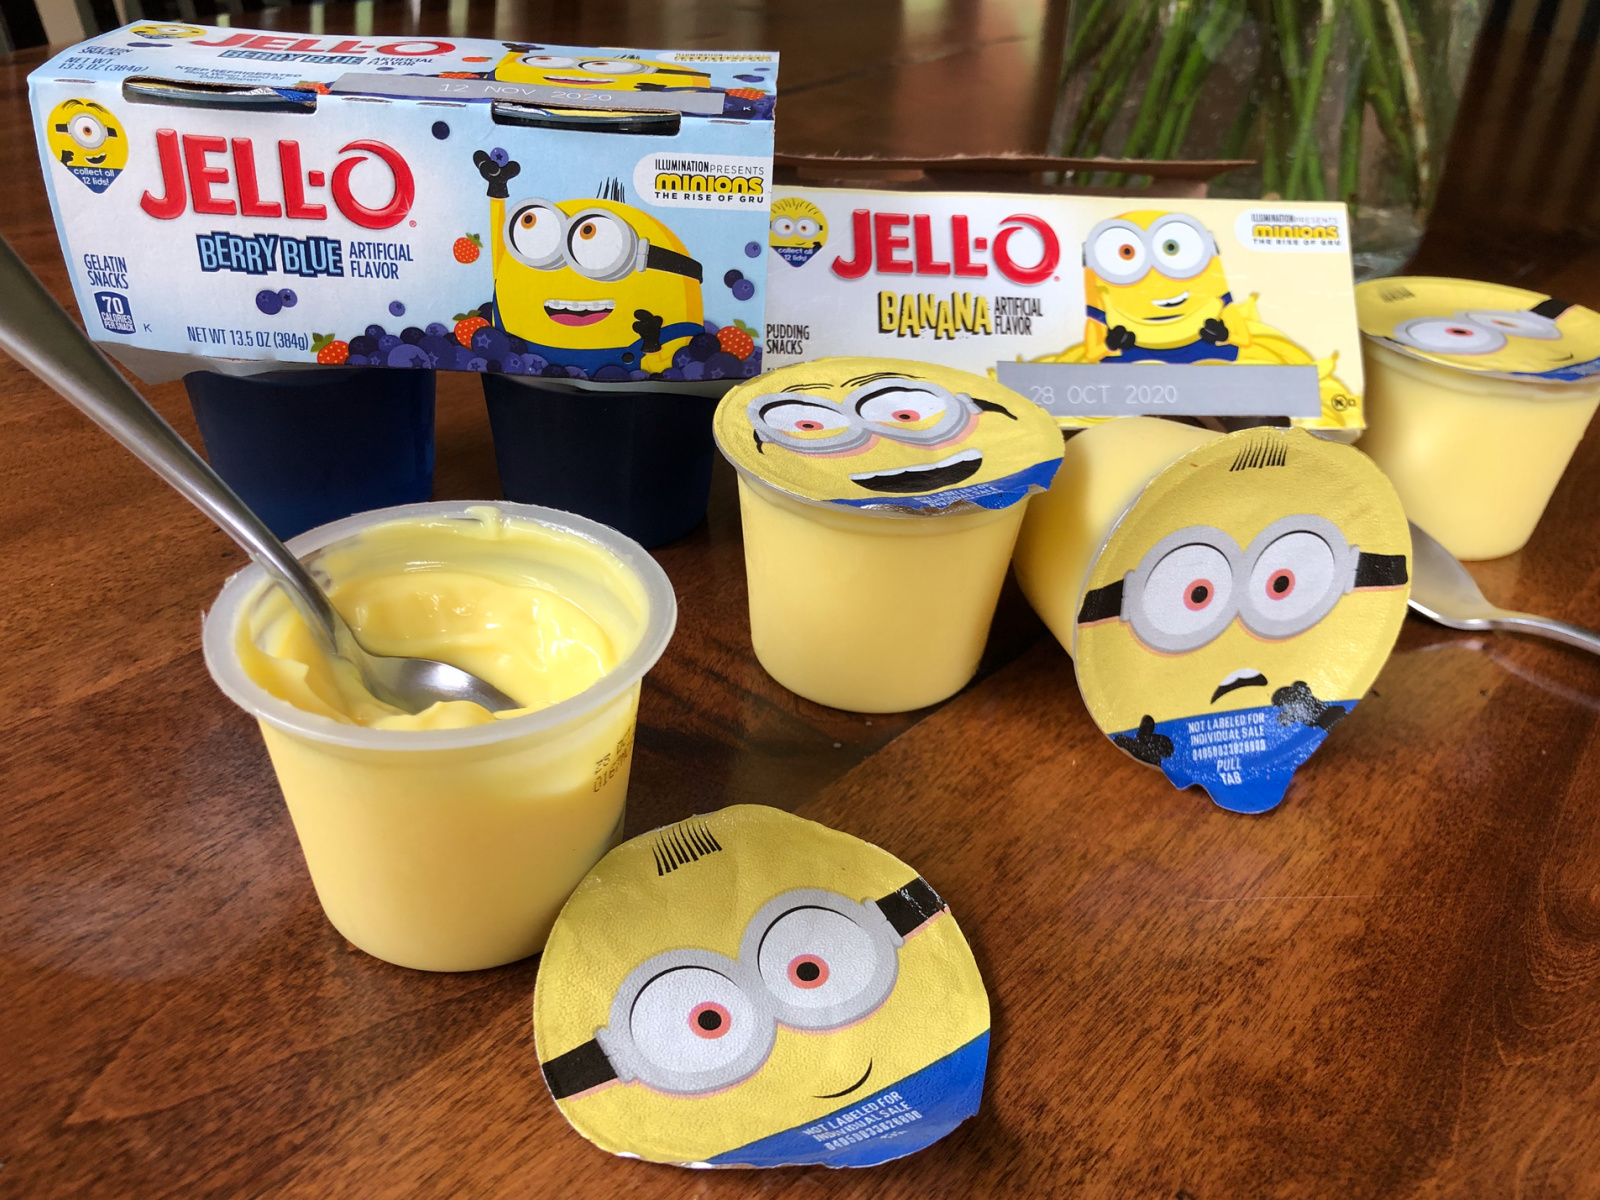 Pick Up A Fantastic Deal On Jell-O Pudding & Gelatin Snacks At Publix - Look For Limited Edition Minions and Trolls Themed Snacks! on I Heart Publix